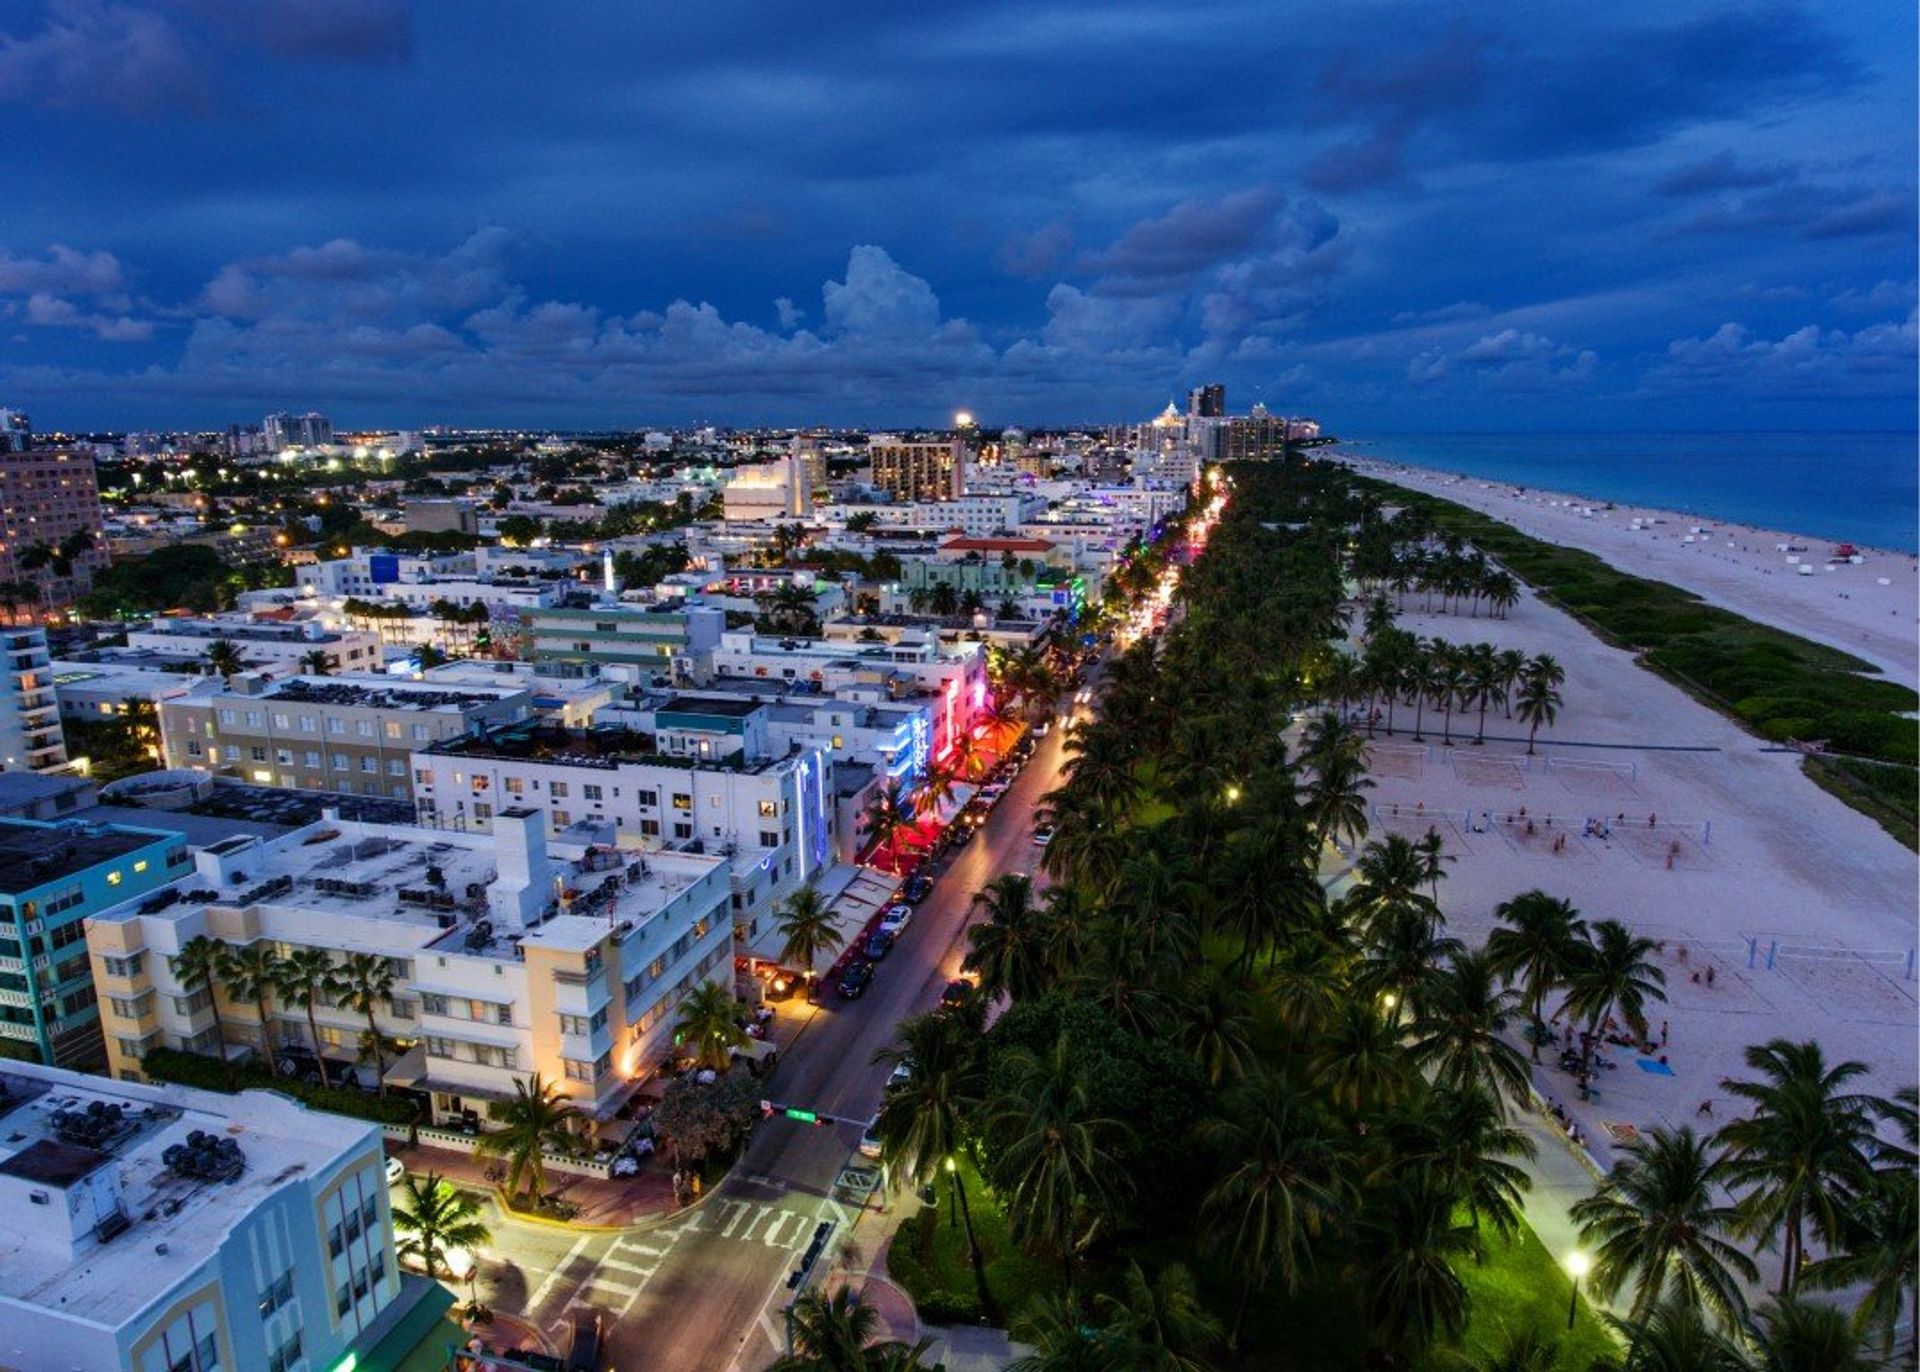 Revel in the bright lights and atmosphere of Ocean Drive, South Beach, Miami, Florida